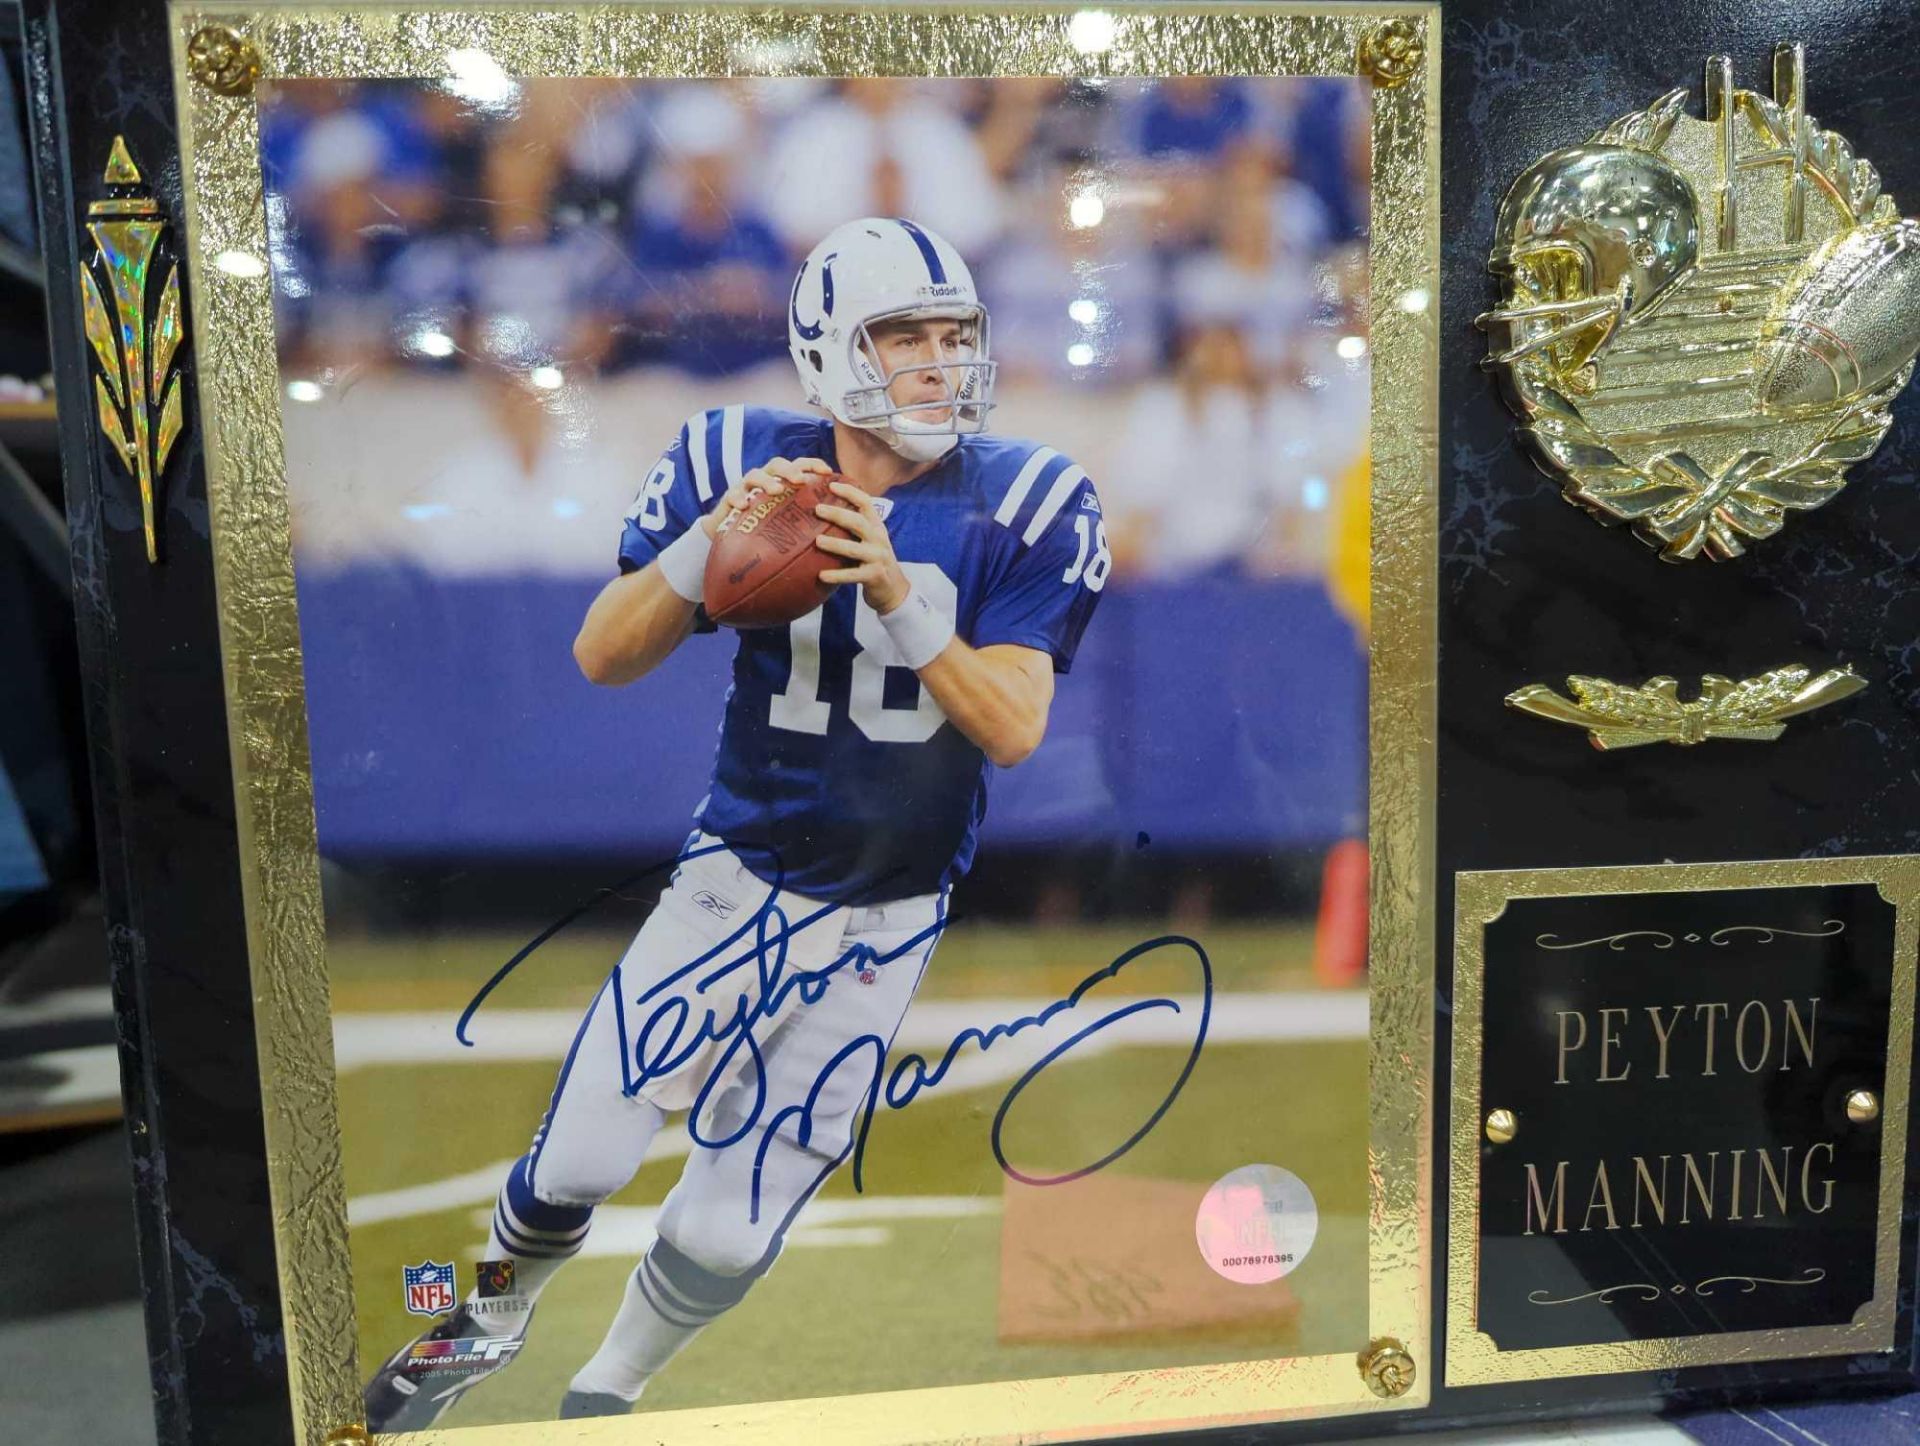 Signed Peyton Manning Plaque - Image 3 of 3